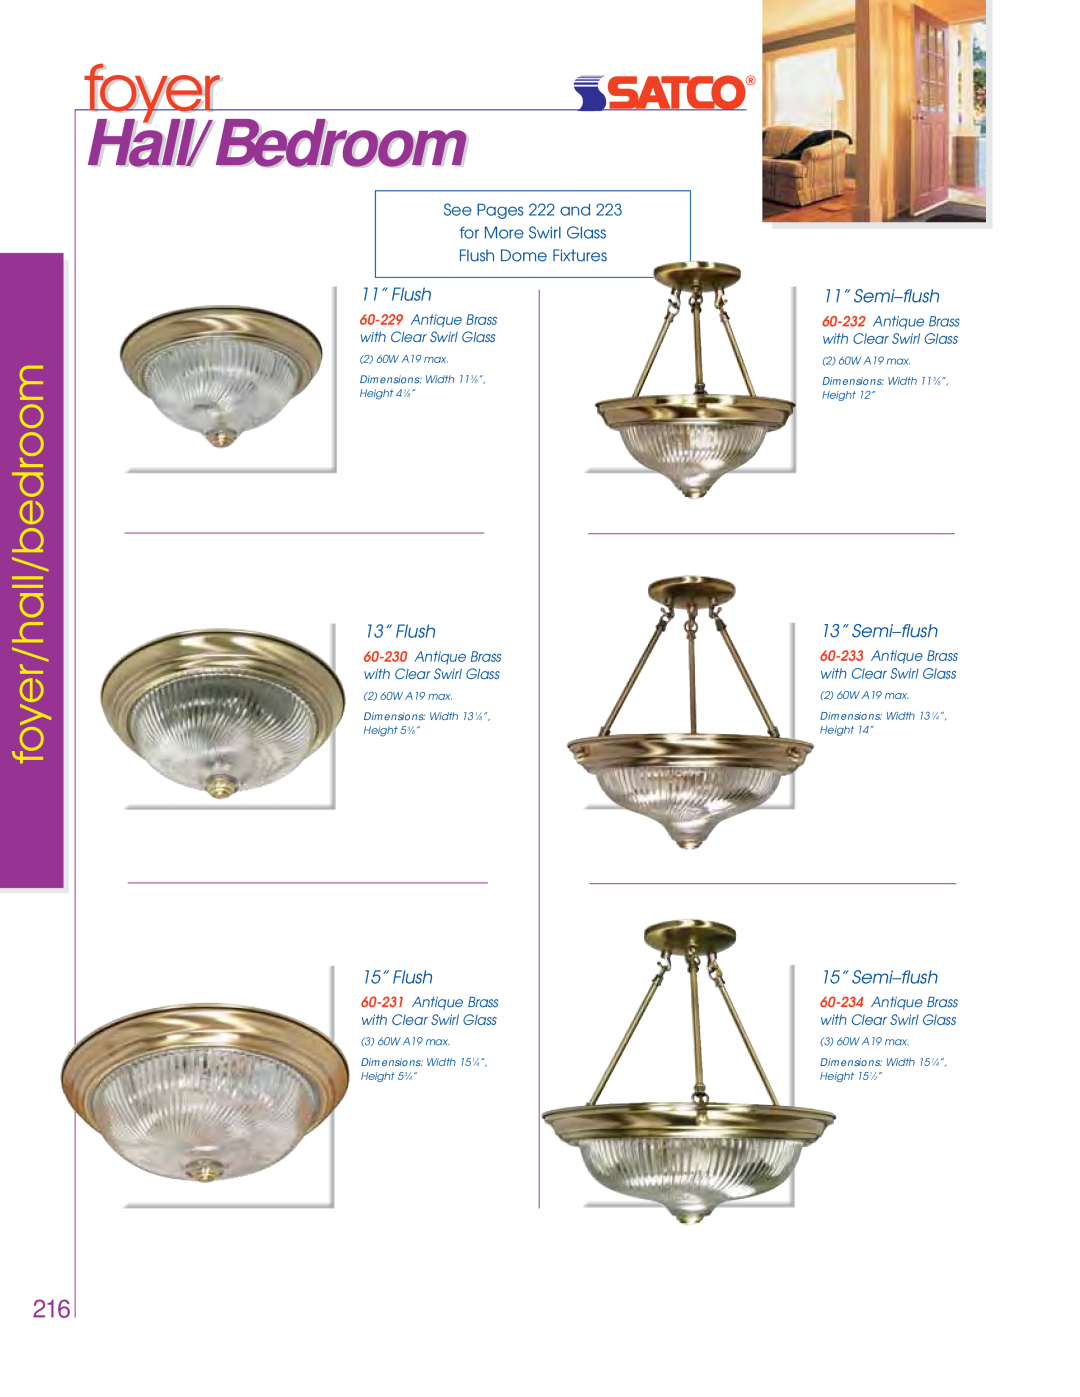 Satco Products 76-694 See Pages 222 and for More Swirl Glass, Flush Dome Fixtures, Antique Brass with Clear Swirl Glass 